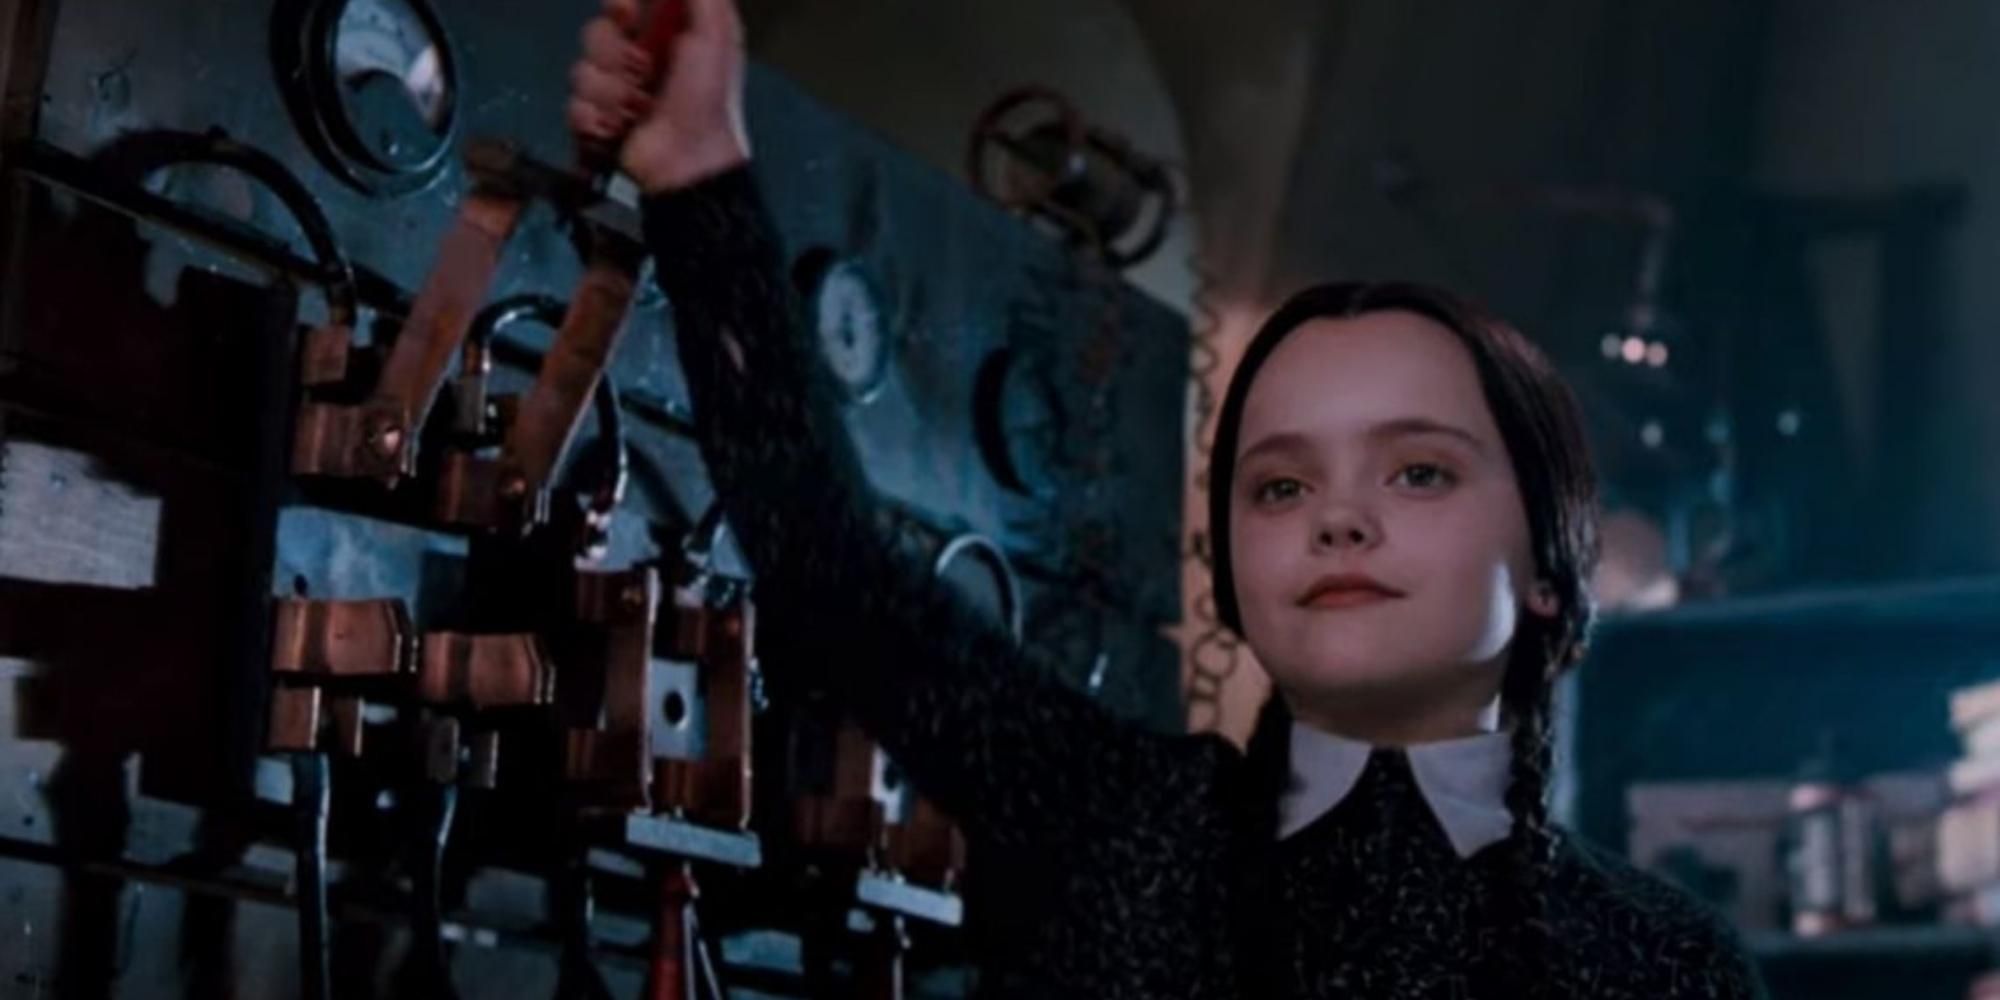 Wednesday Addams in The Addams Family